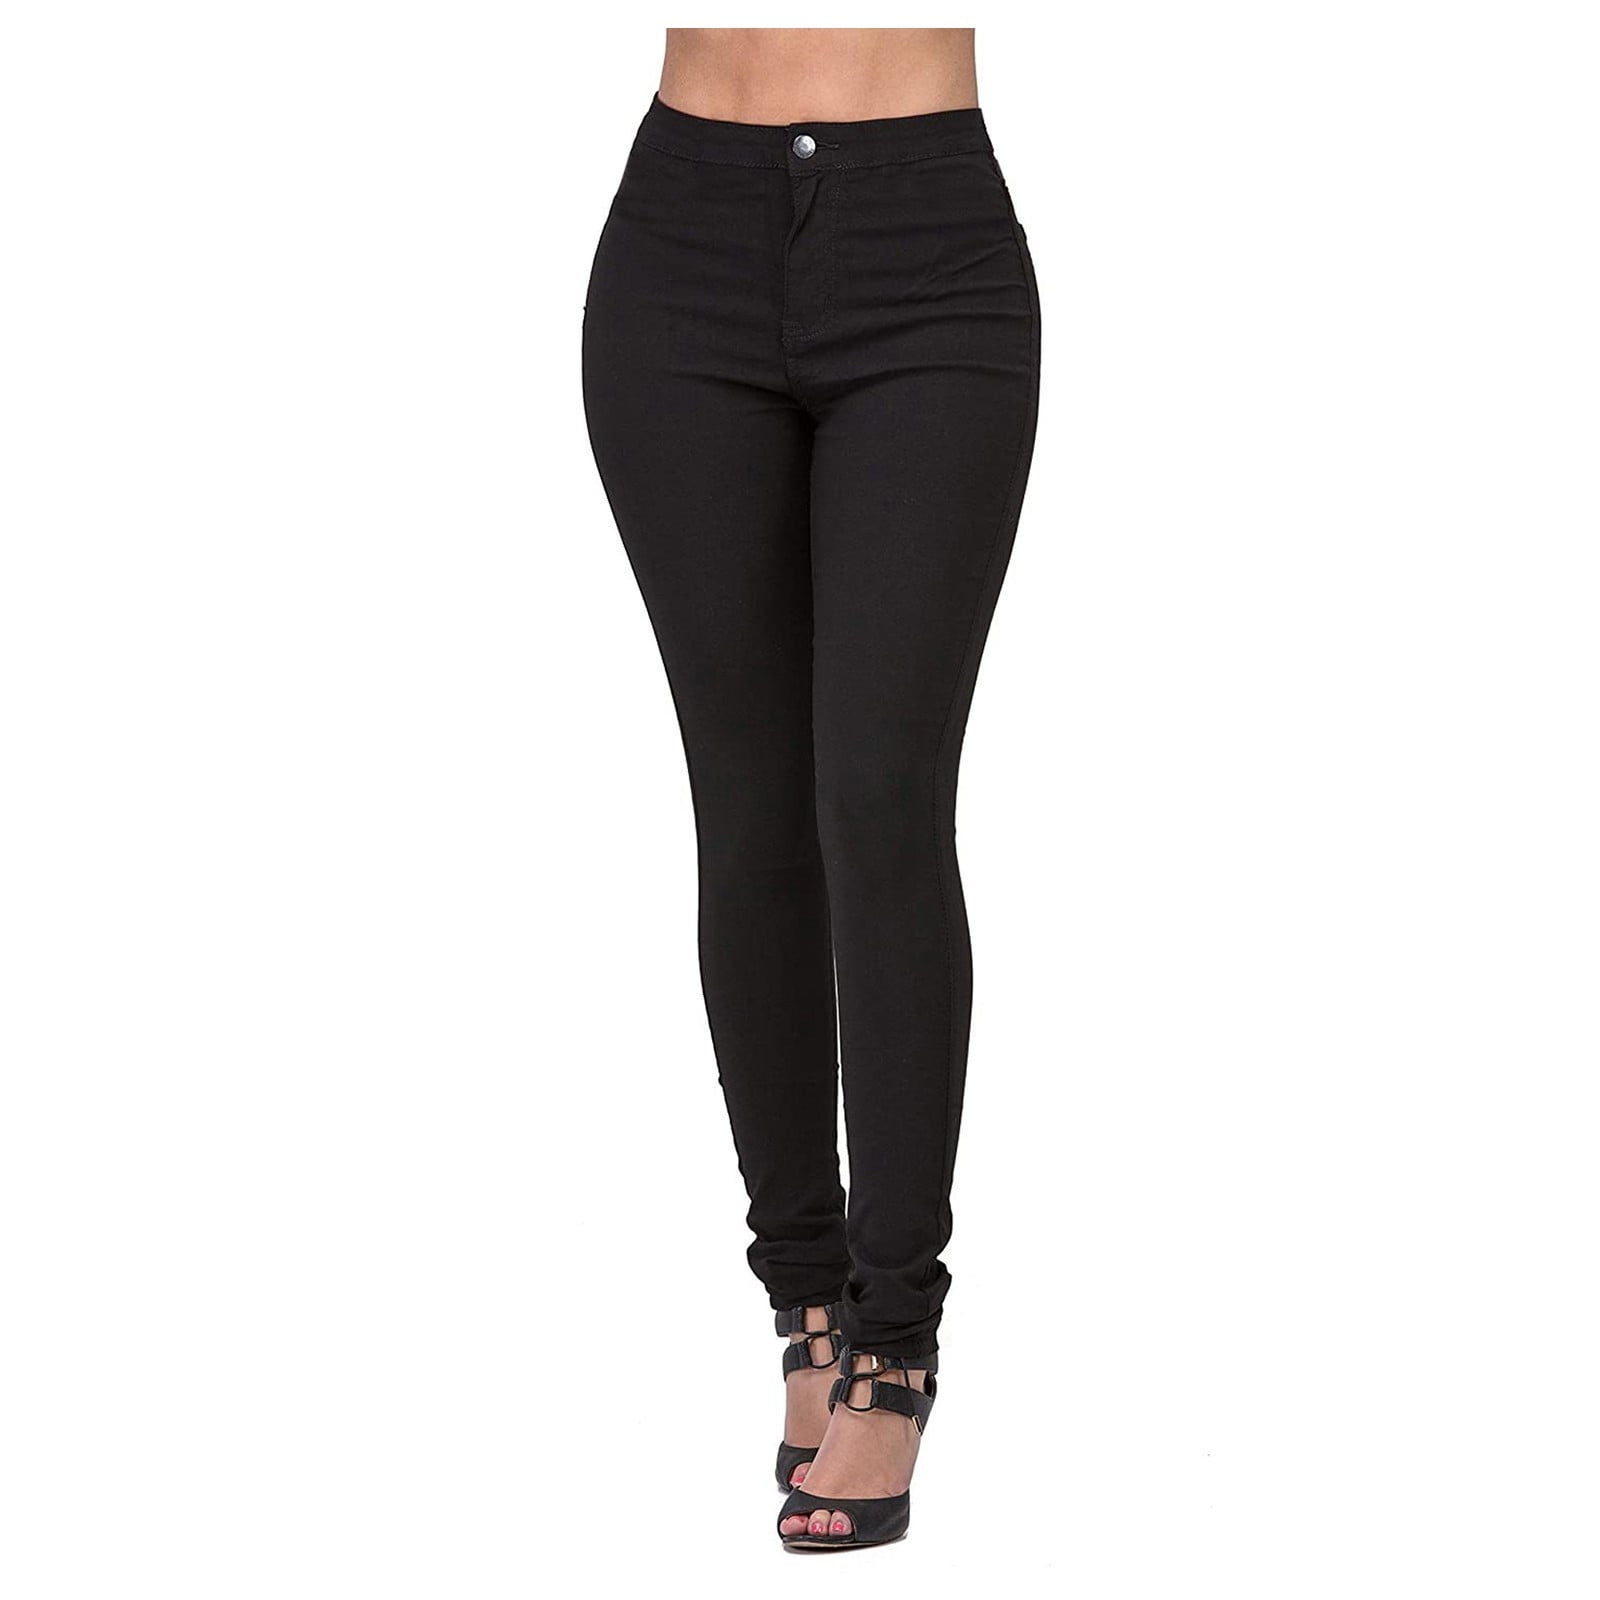 SELONE Leggings with Pockets for Women Pull On Yoga Pants Scrunch High ...